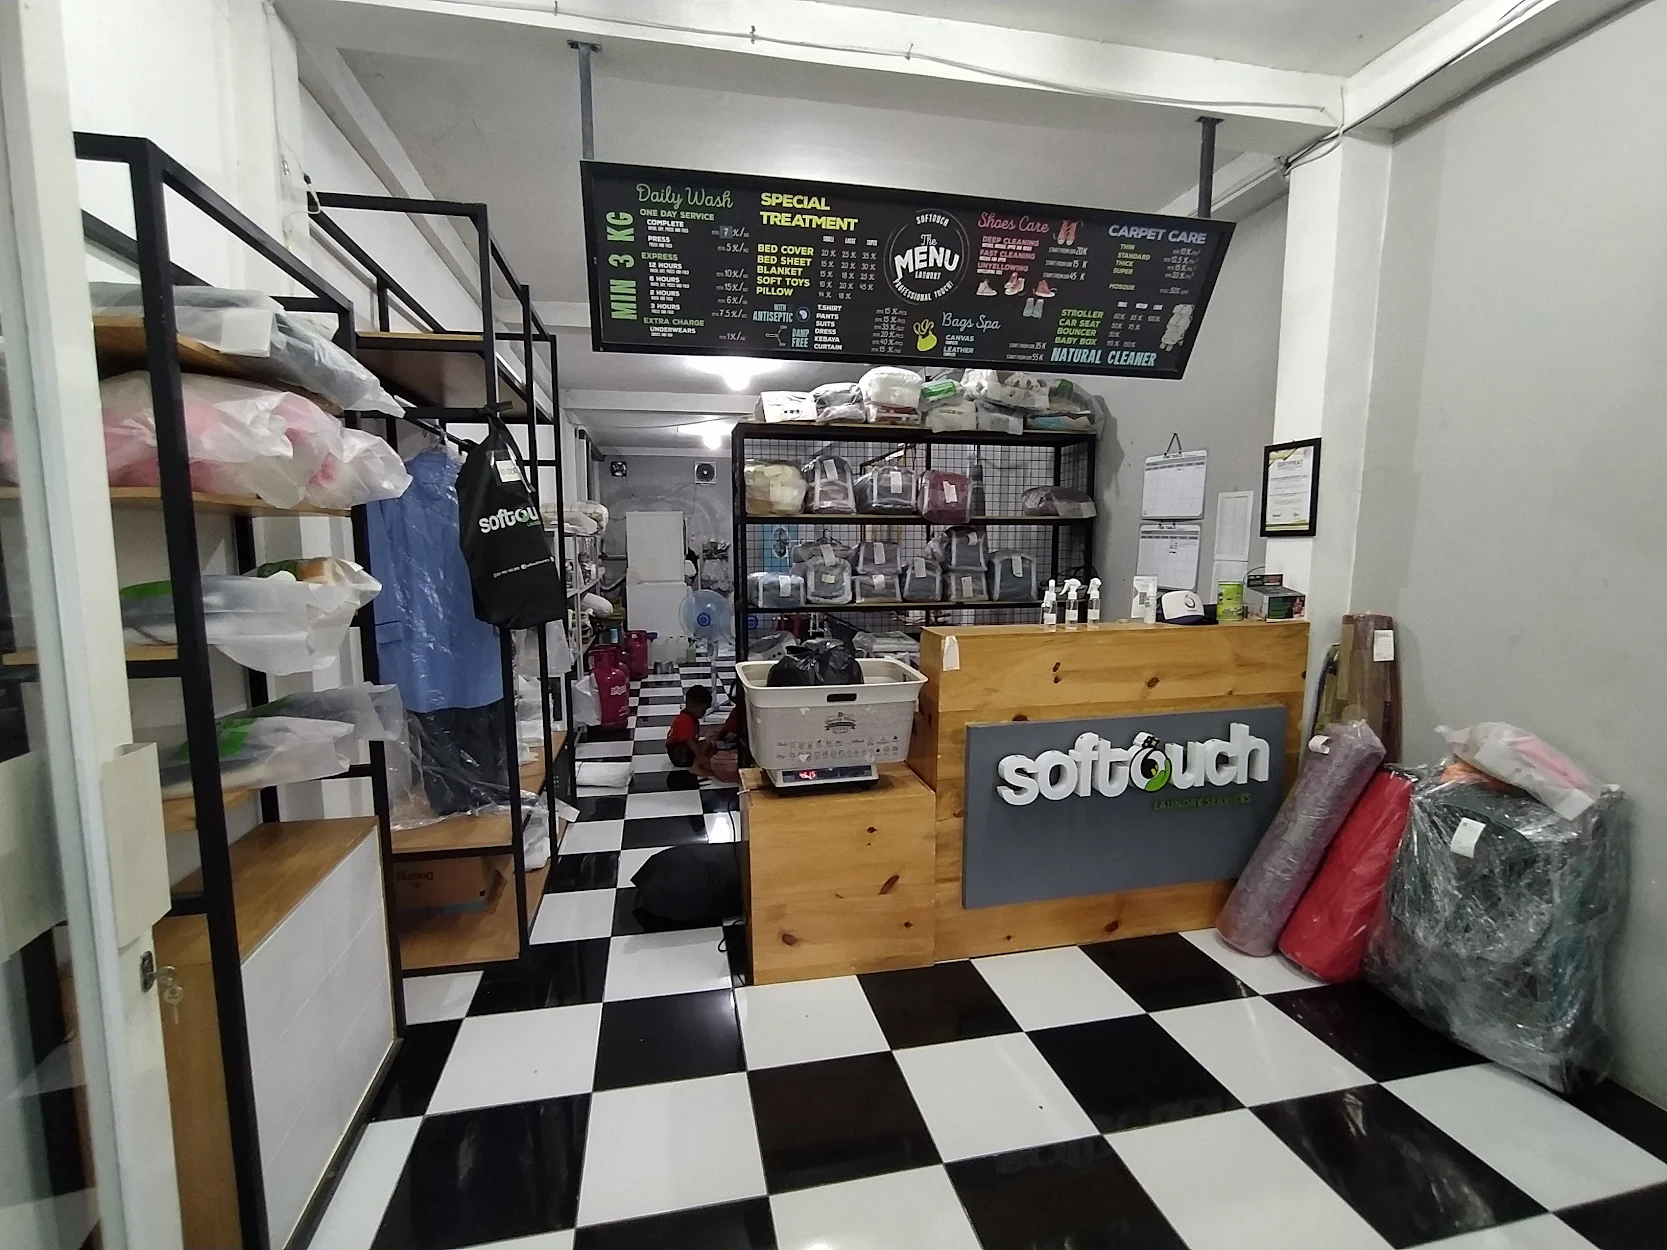 Softouch Laundry